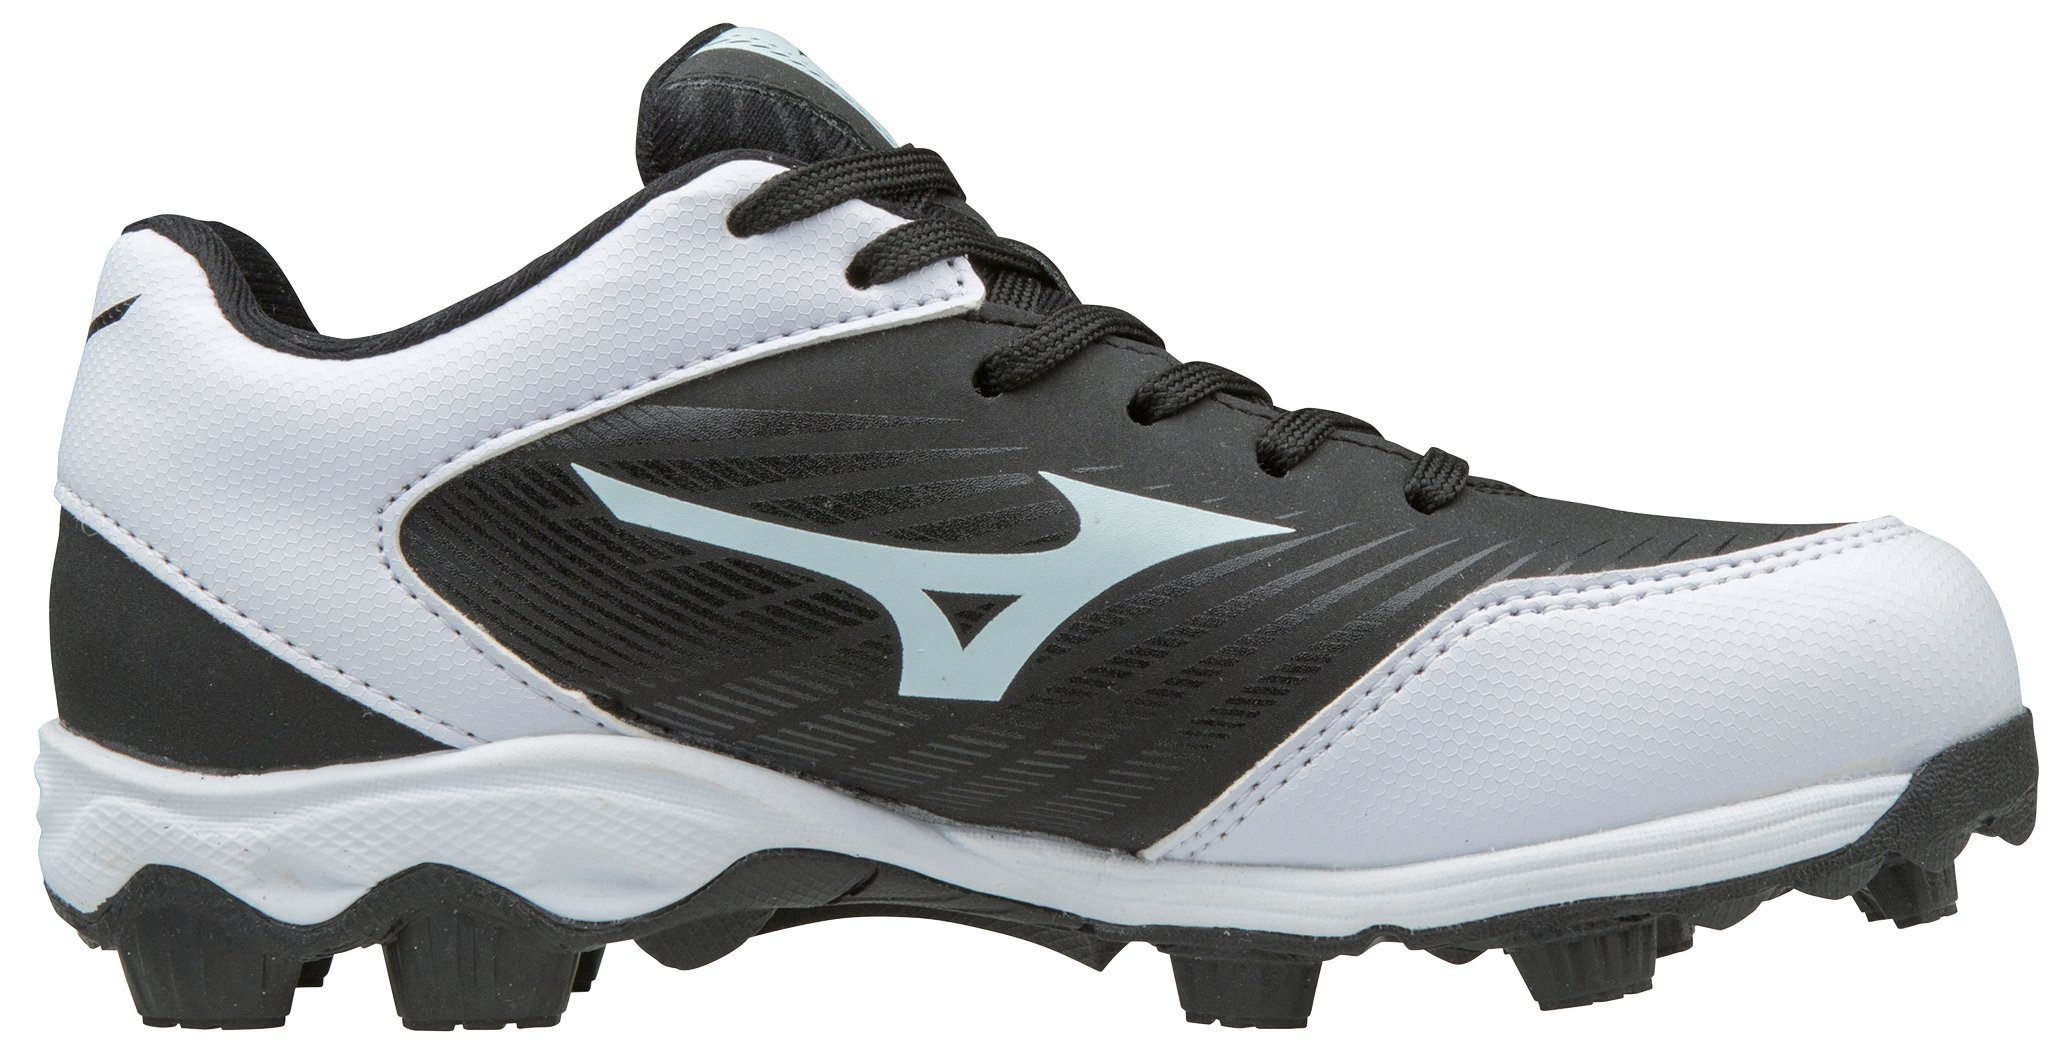 Mizuno Youth 9 Spike Advanced Franchise 9 Cleats Size 5 Black/White - image 4 of 6